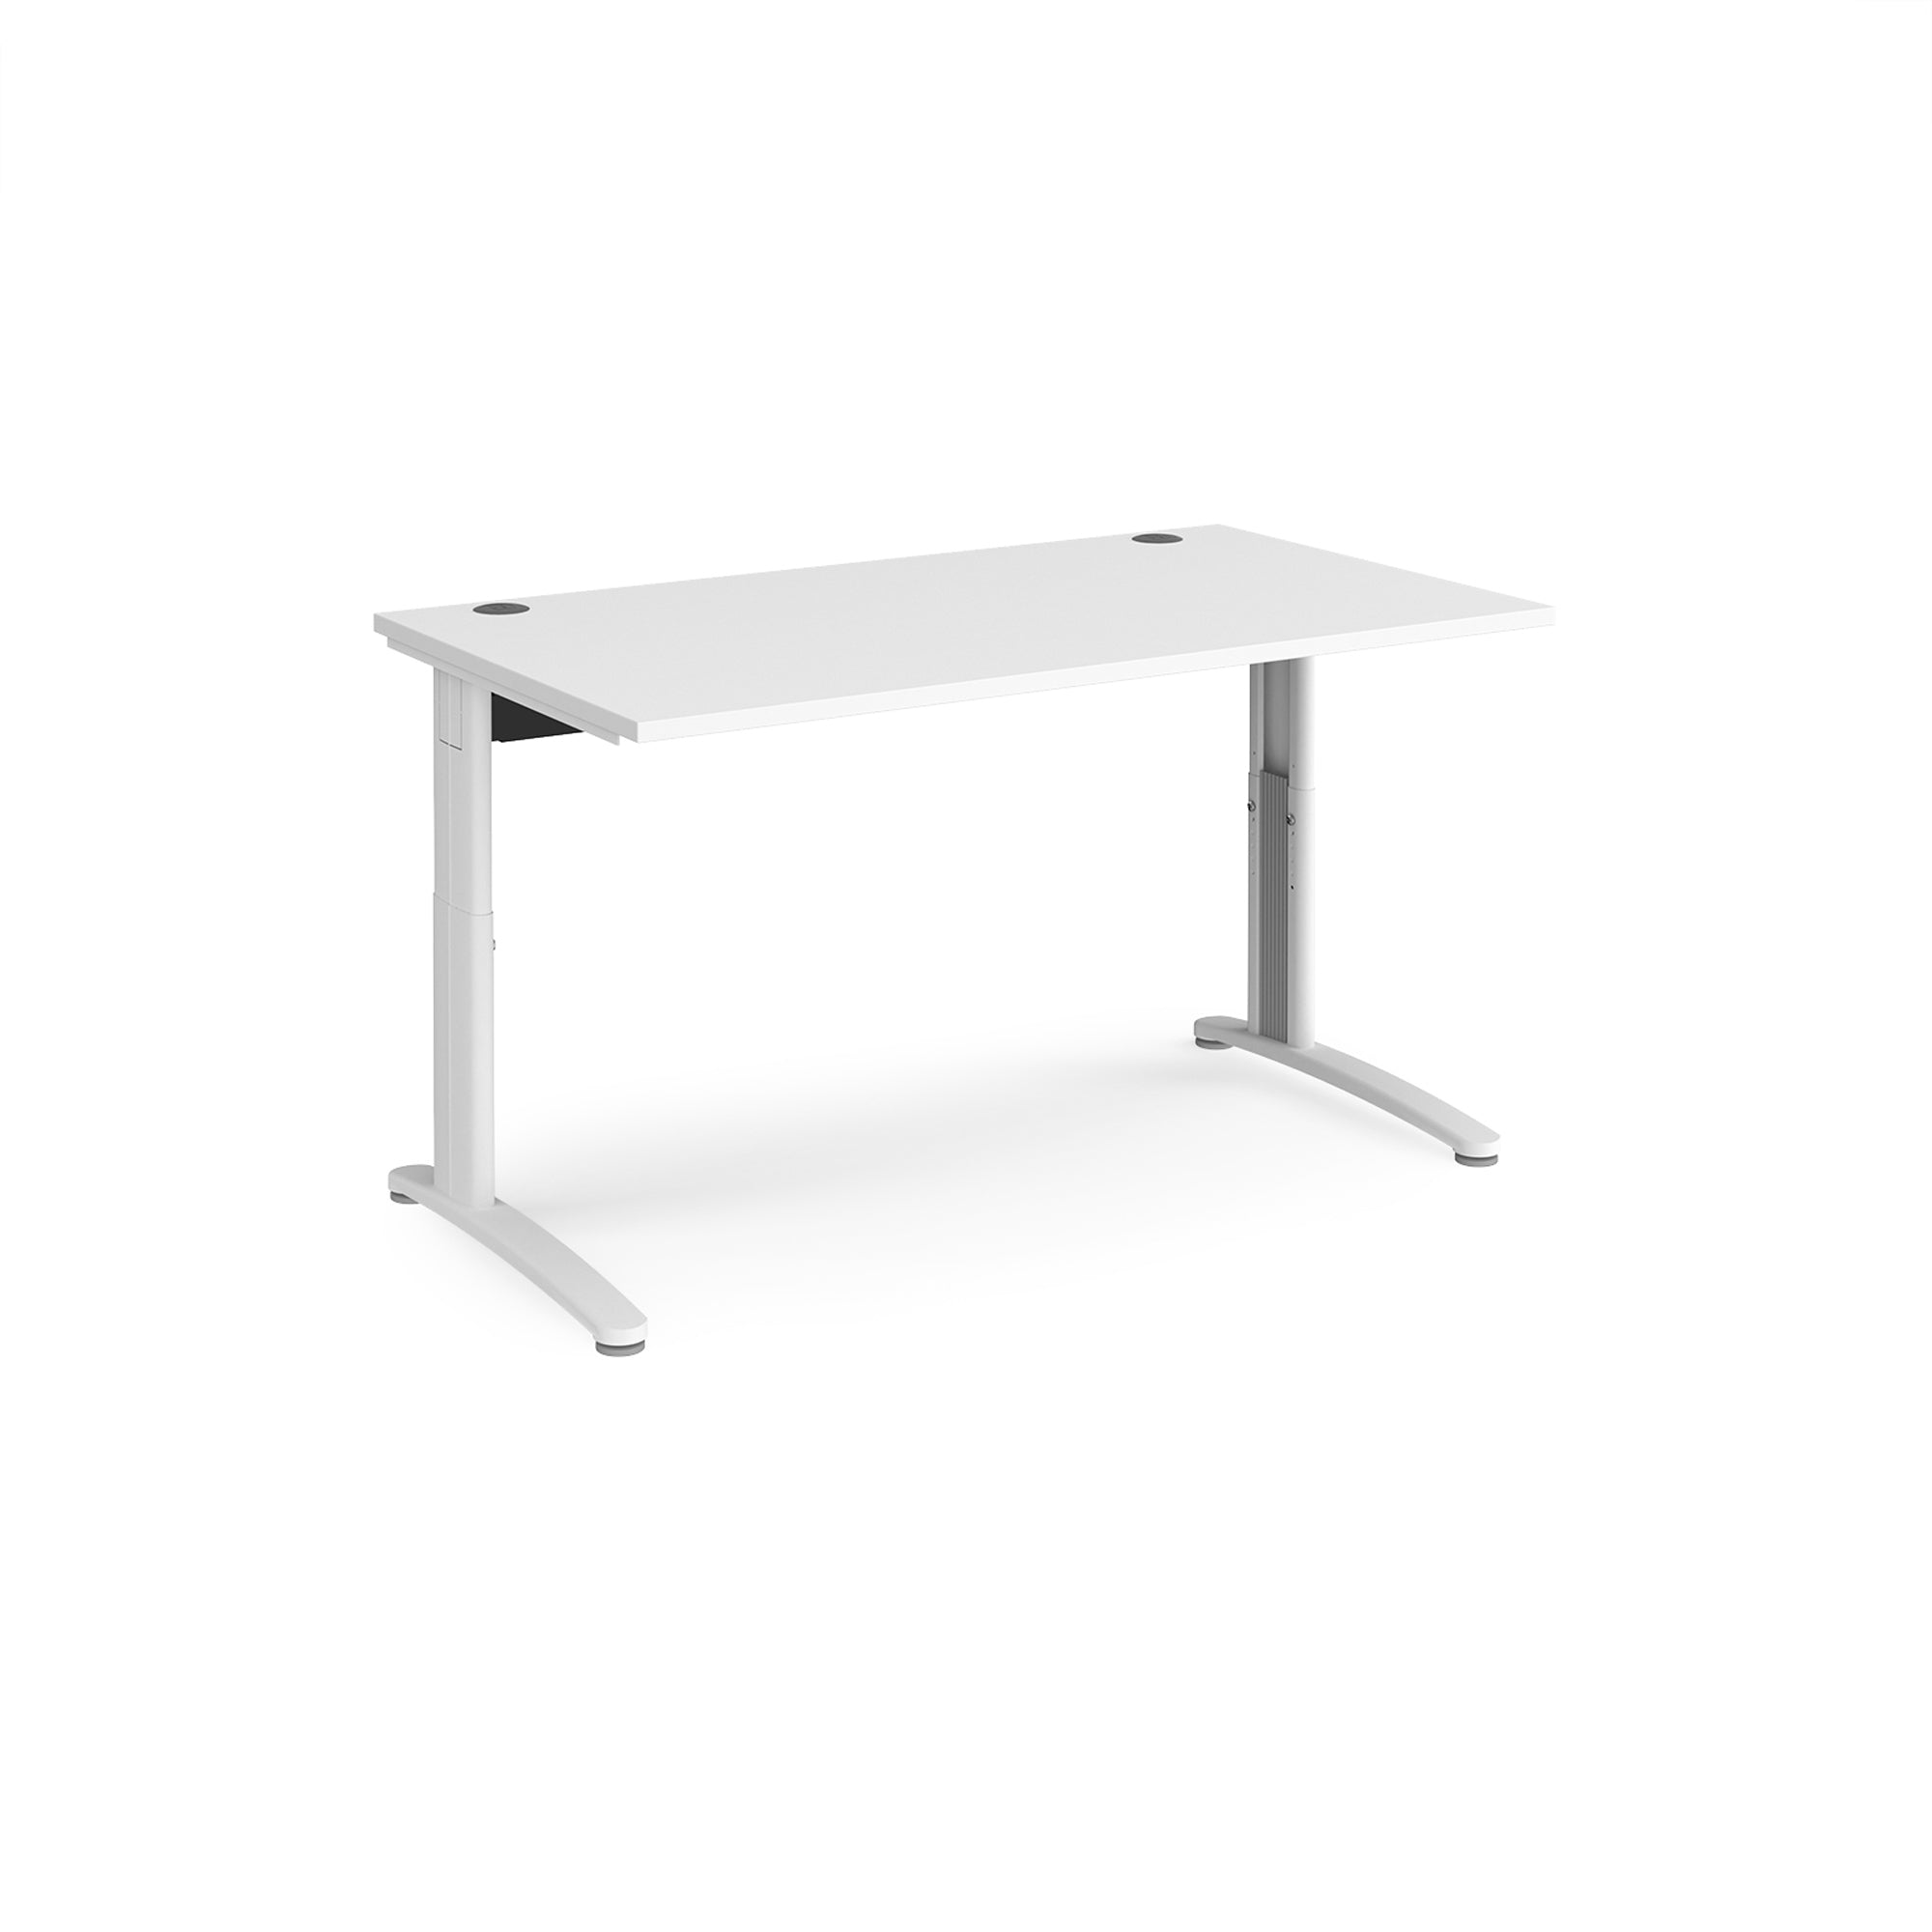 TR10 height settable straight desk 800 deep - Office Products Online